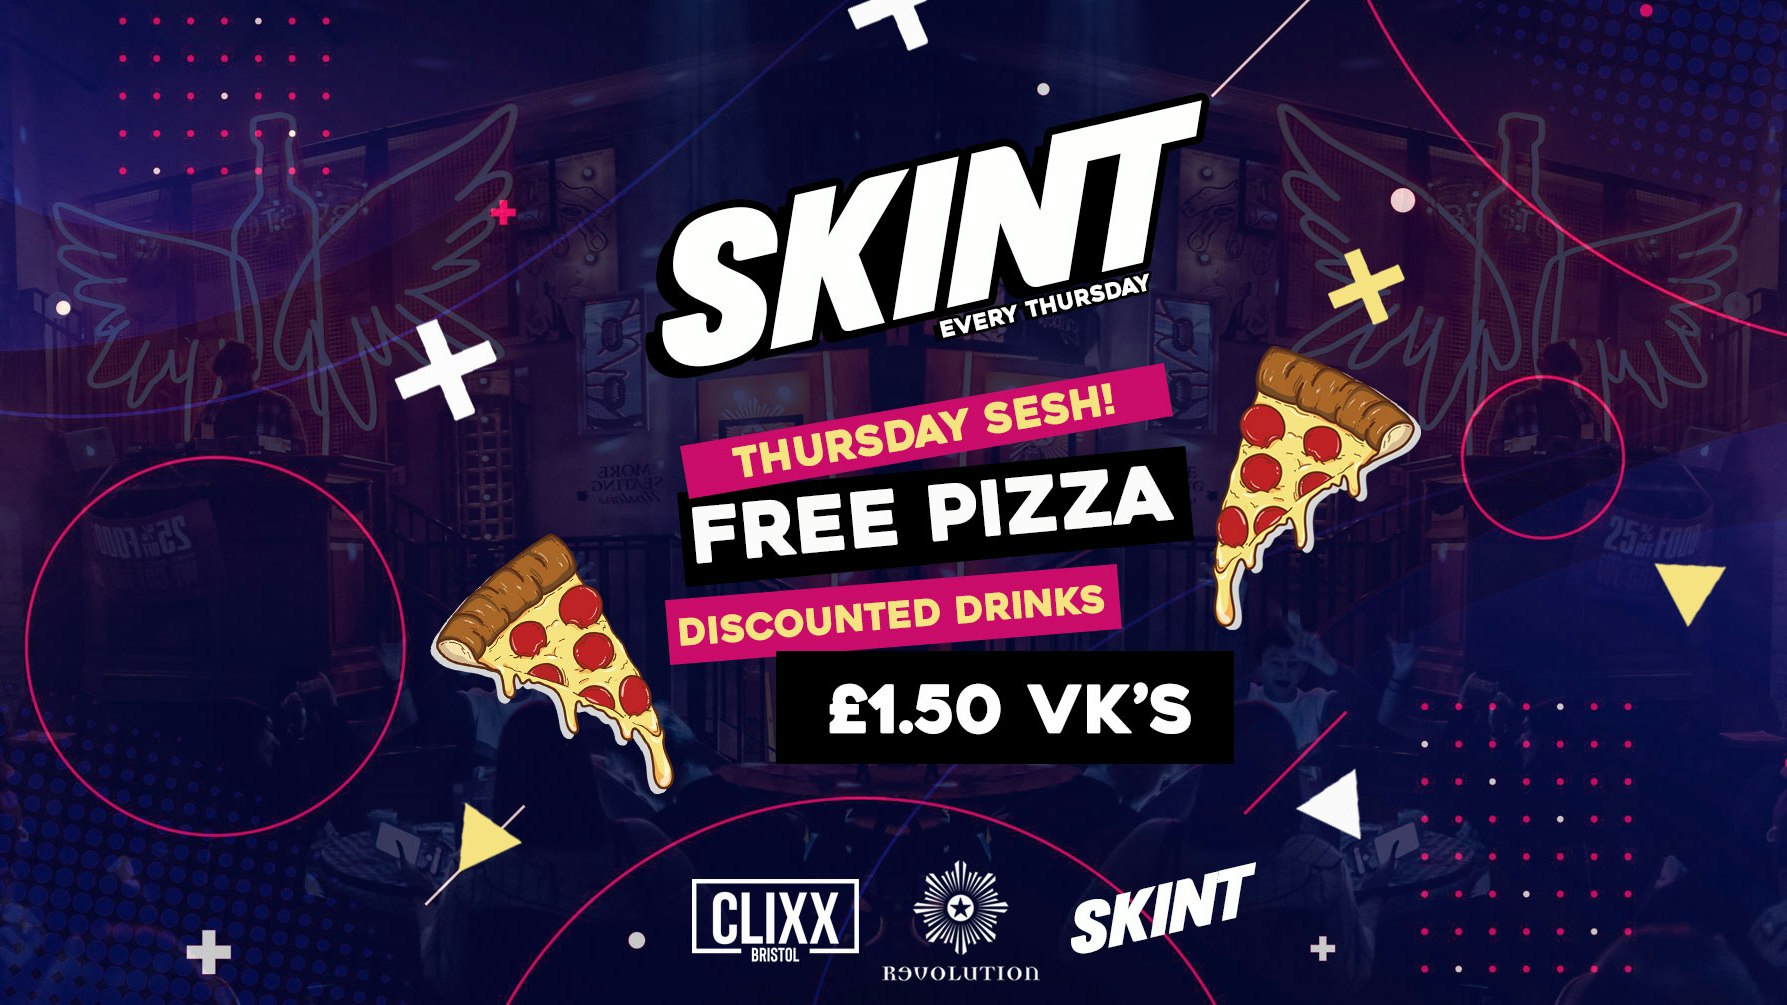 SKINT | Thursday Sesh! – FREE PIZZA + £1.50 WKD’s  – Extra tickets just added